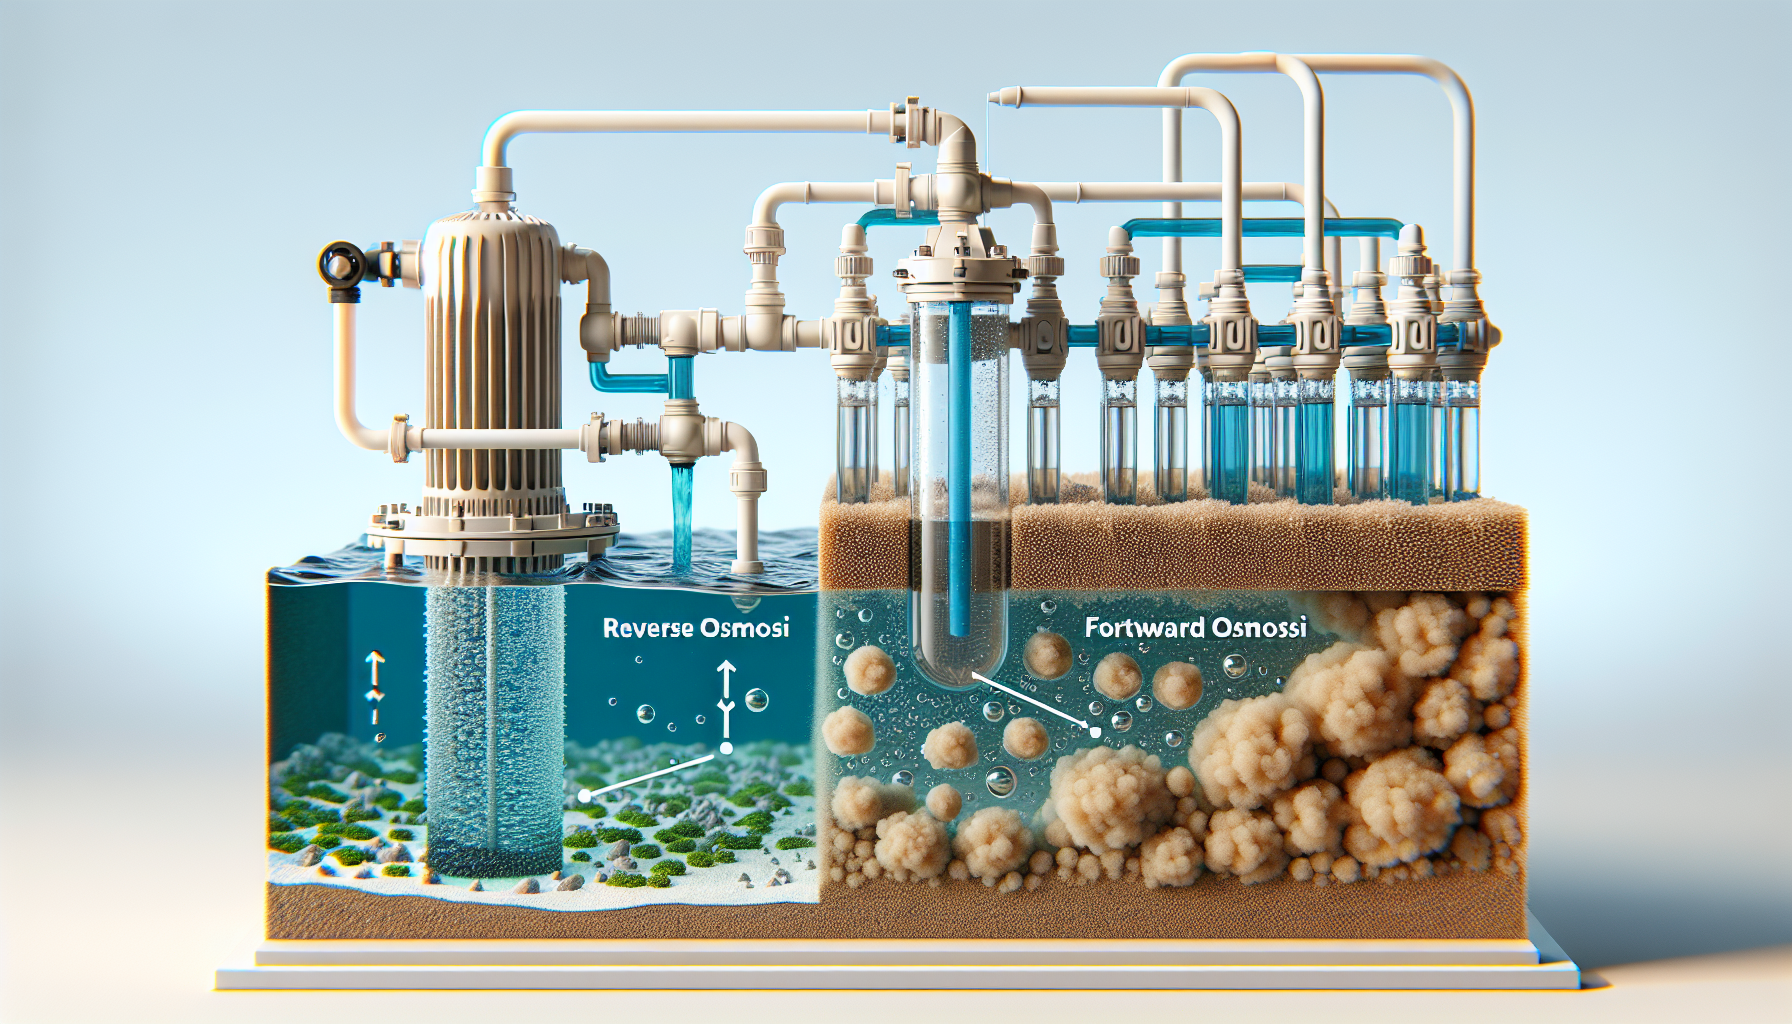 Illustration of reverse osmosis and forward osmosis processes